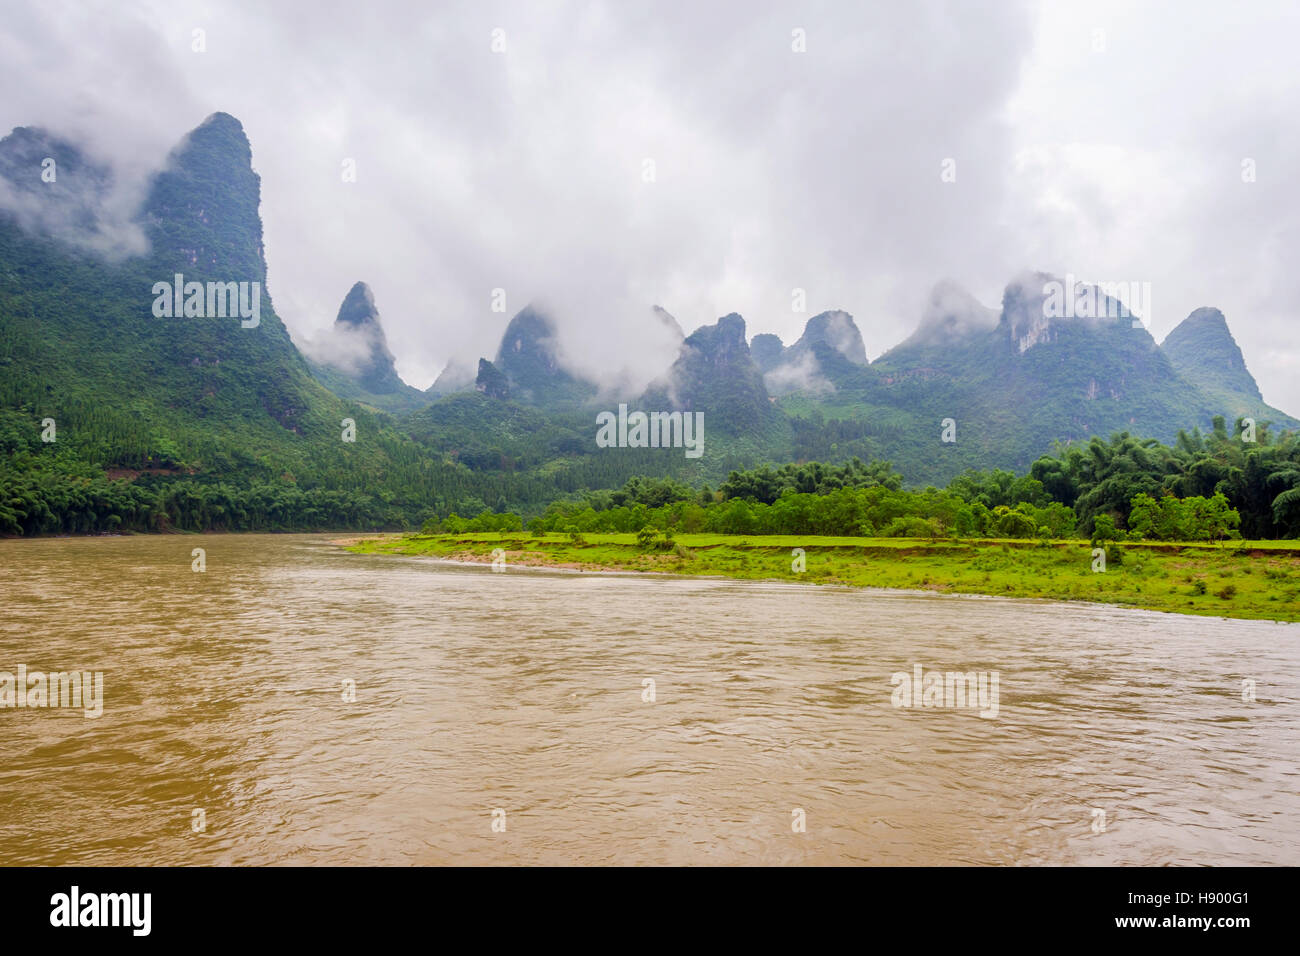 Li river with misty clouds and fog surrounded by famous karst mountains, Guangxi Zhuang, China Stock Photo